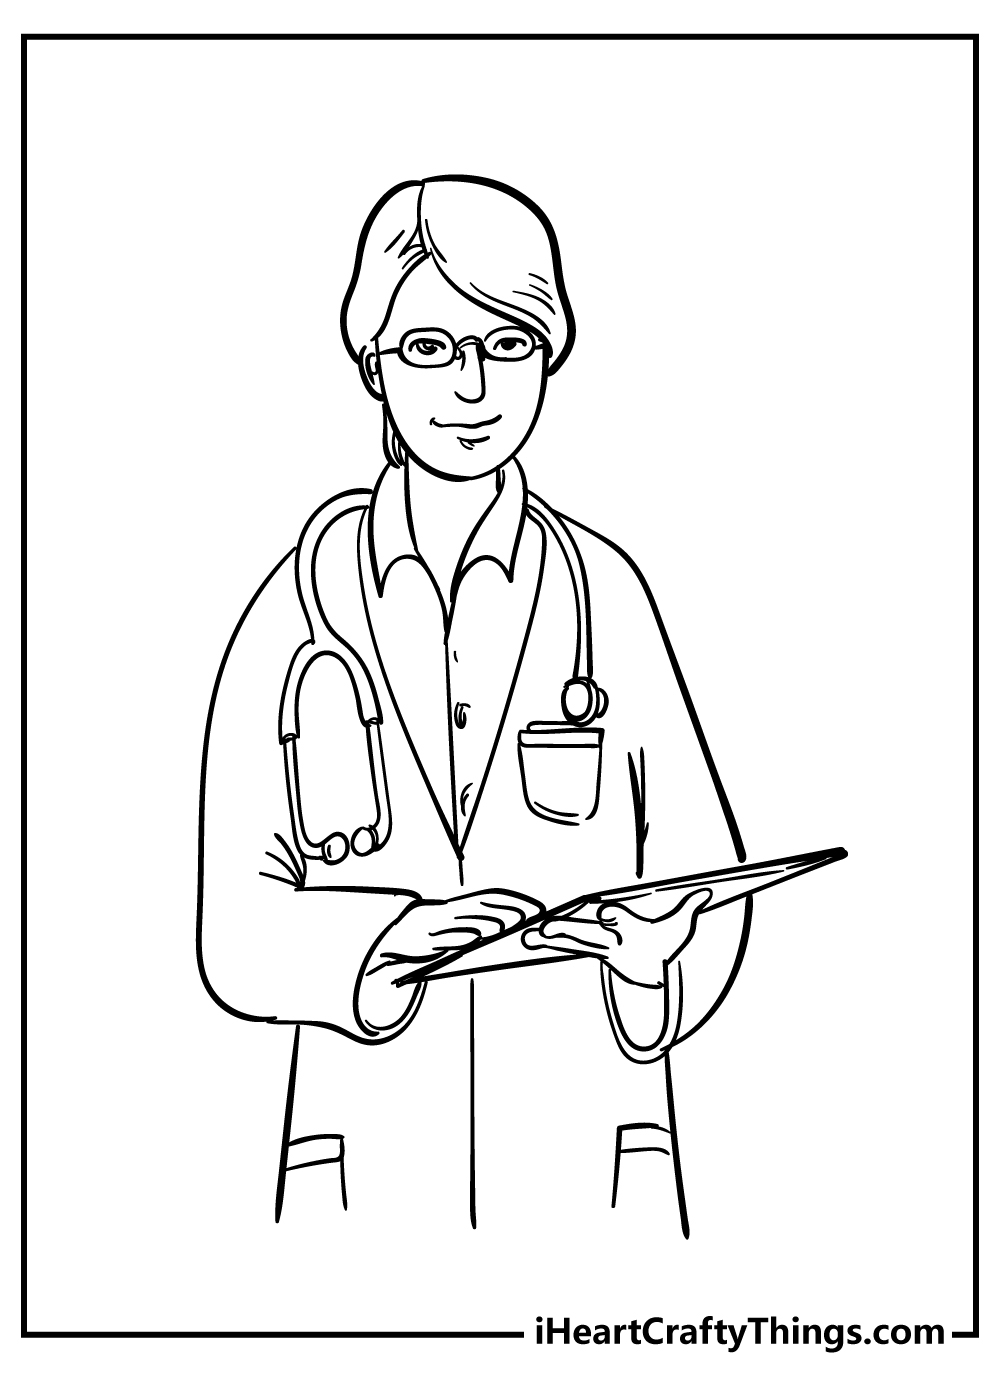 Doctor Coloring Pages for kids free download